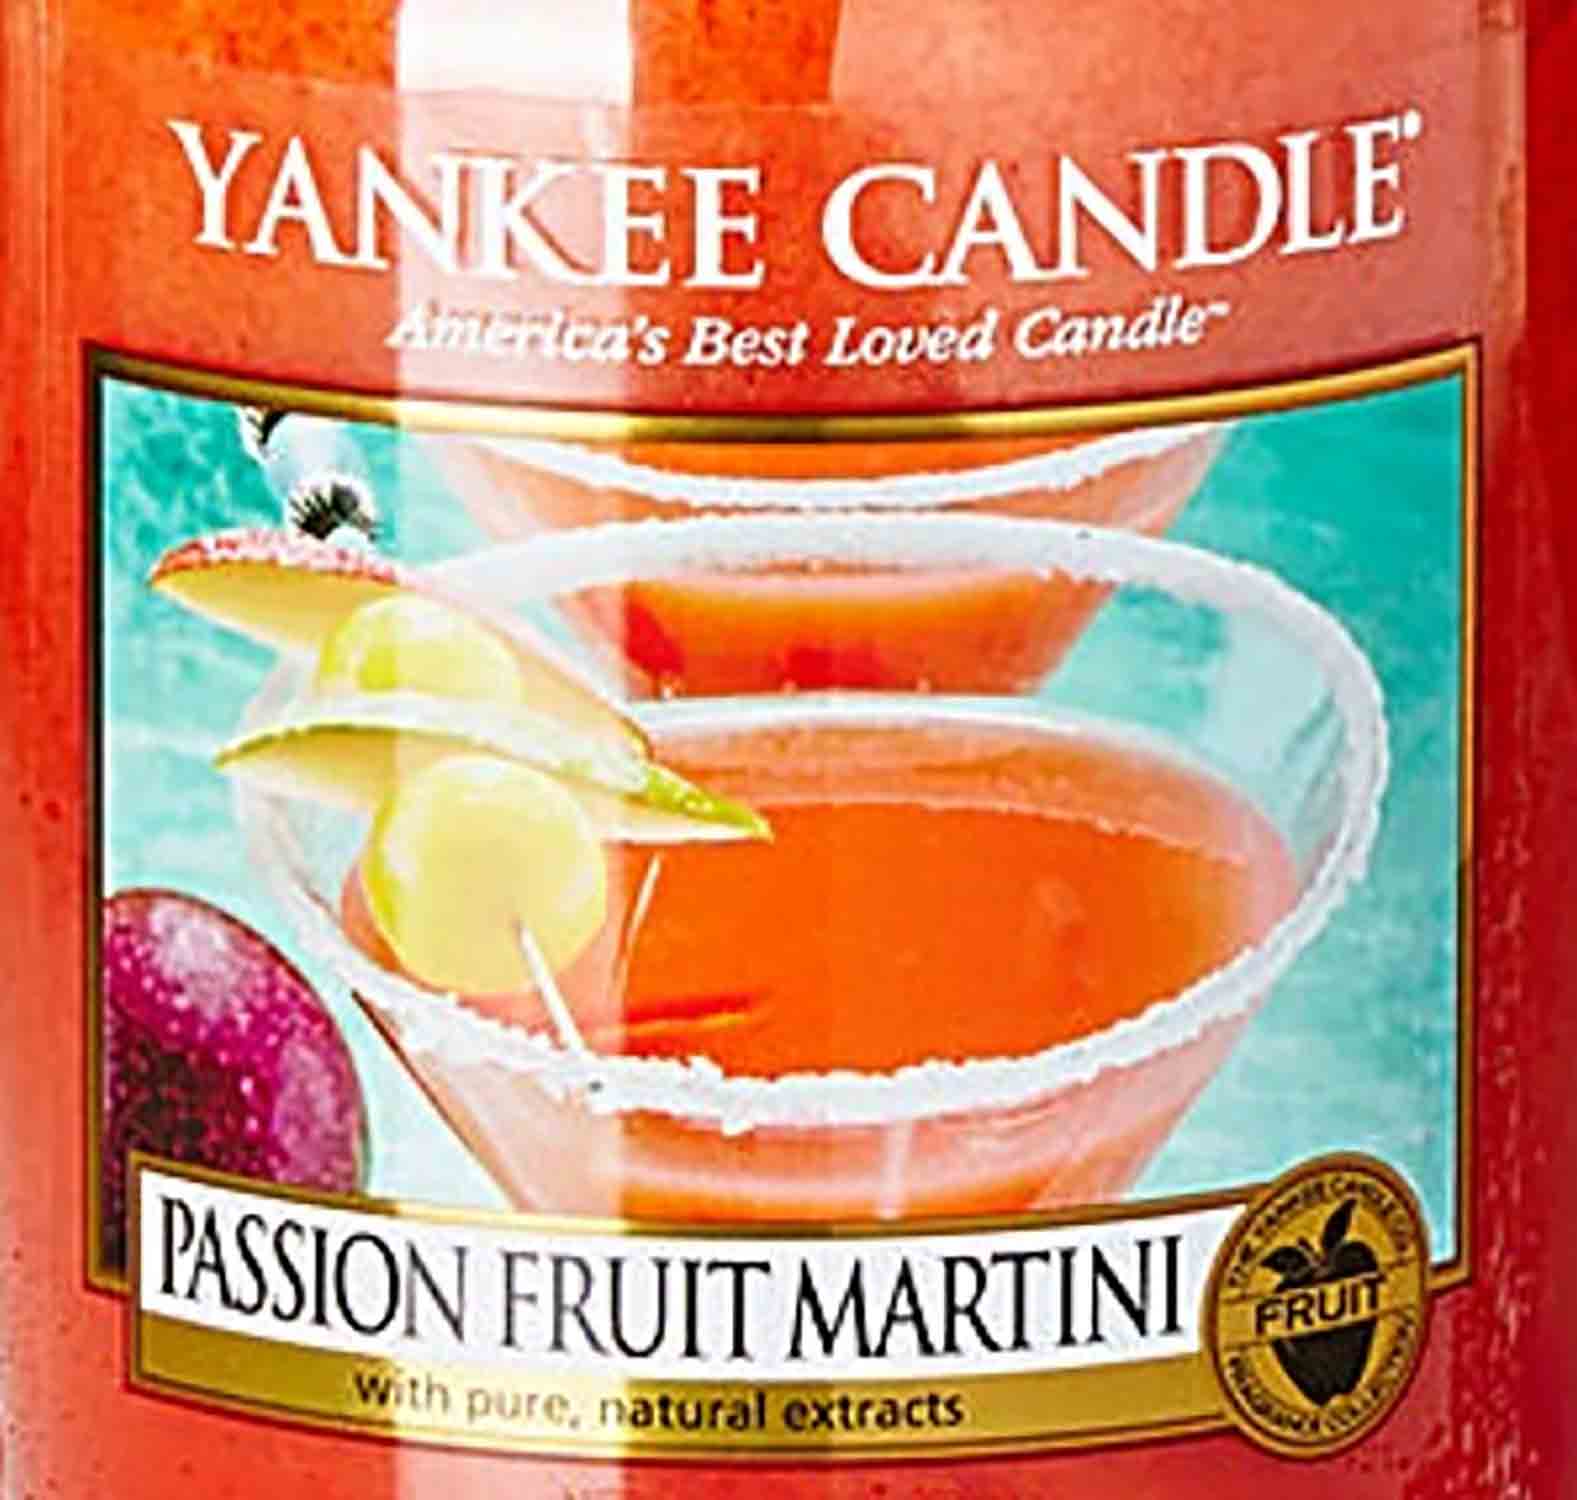 Yankee Candle Passion Fruit Martini 22 g - Crumble vosk